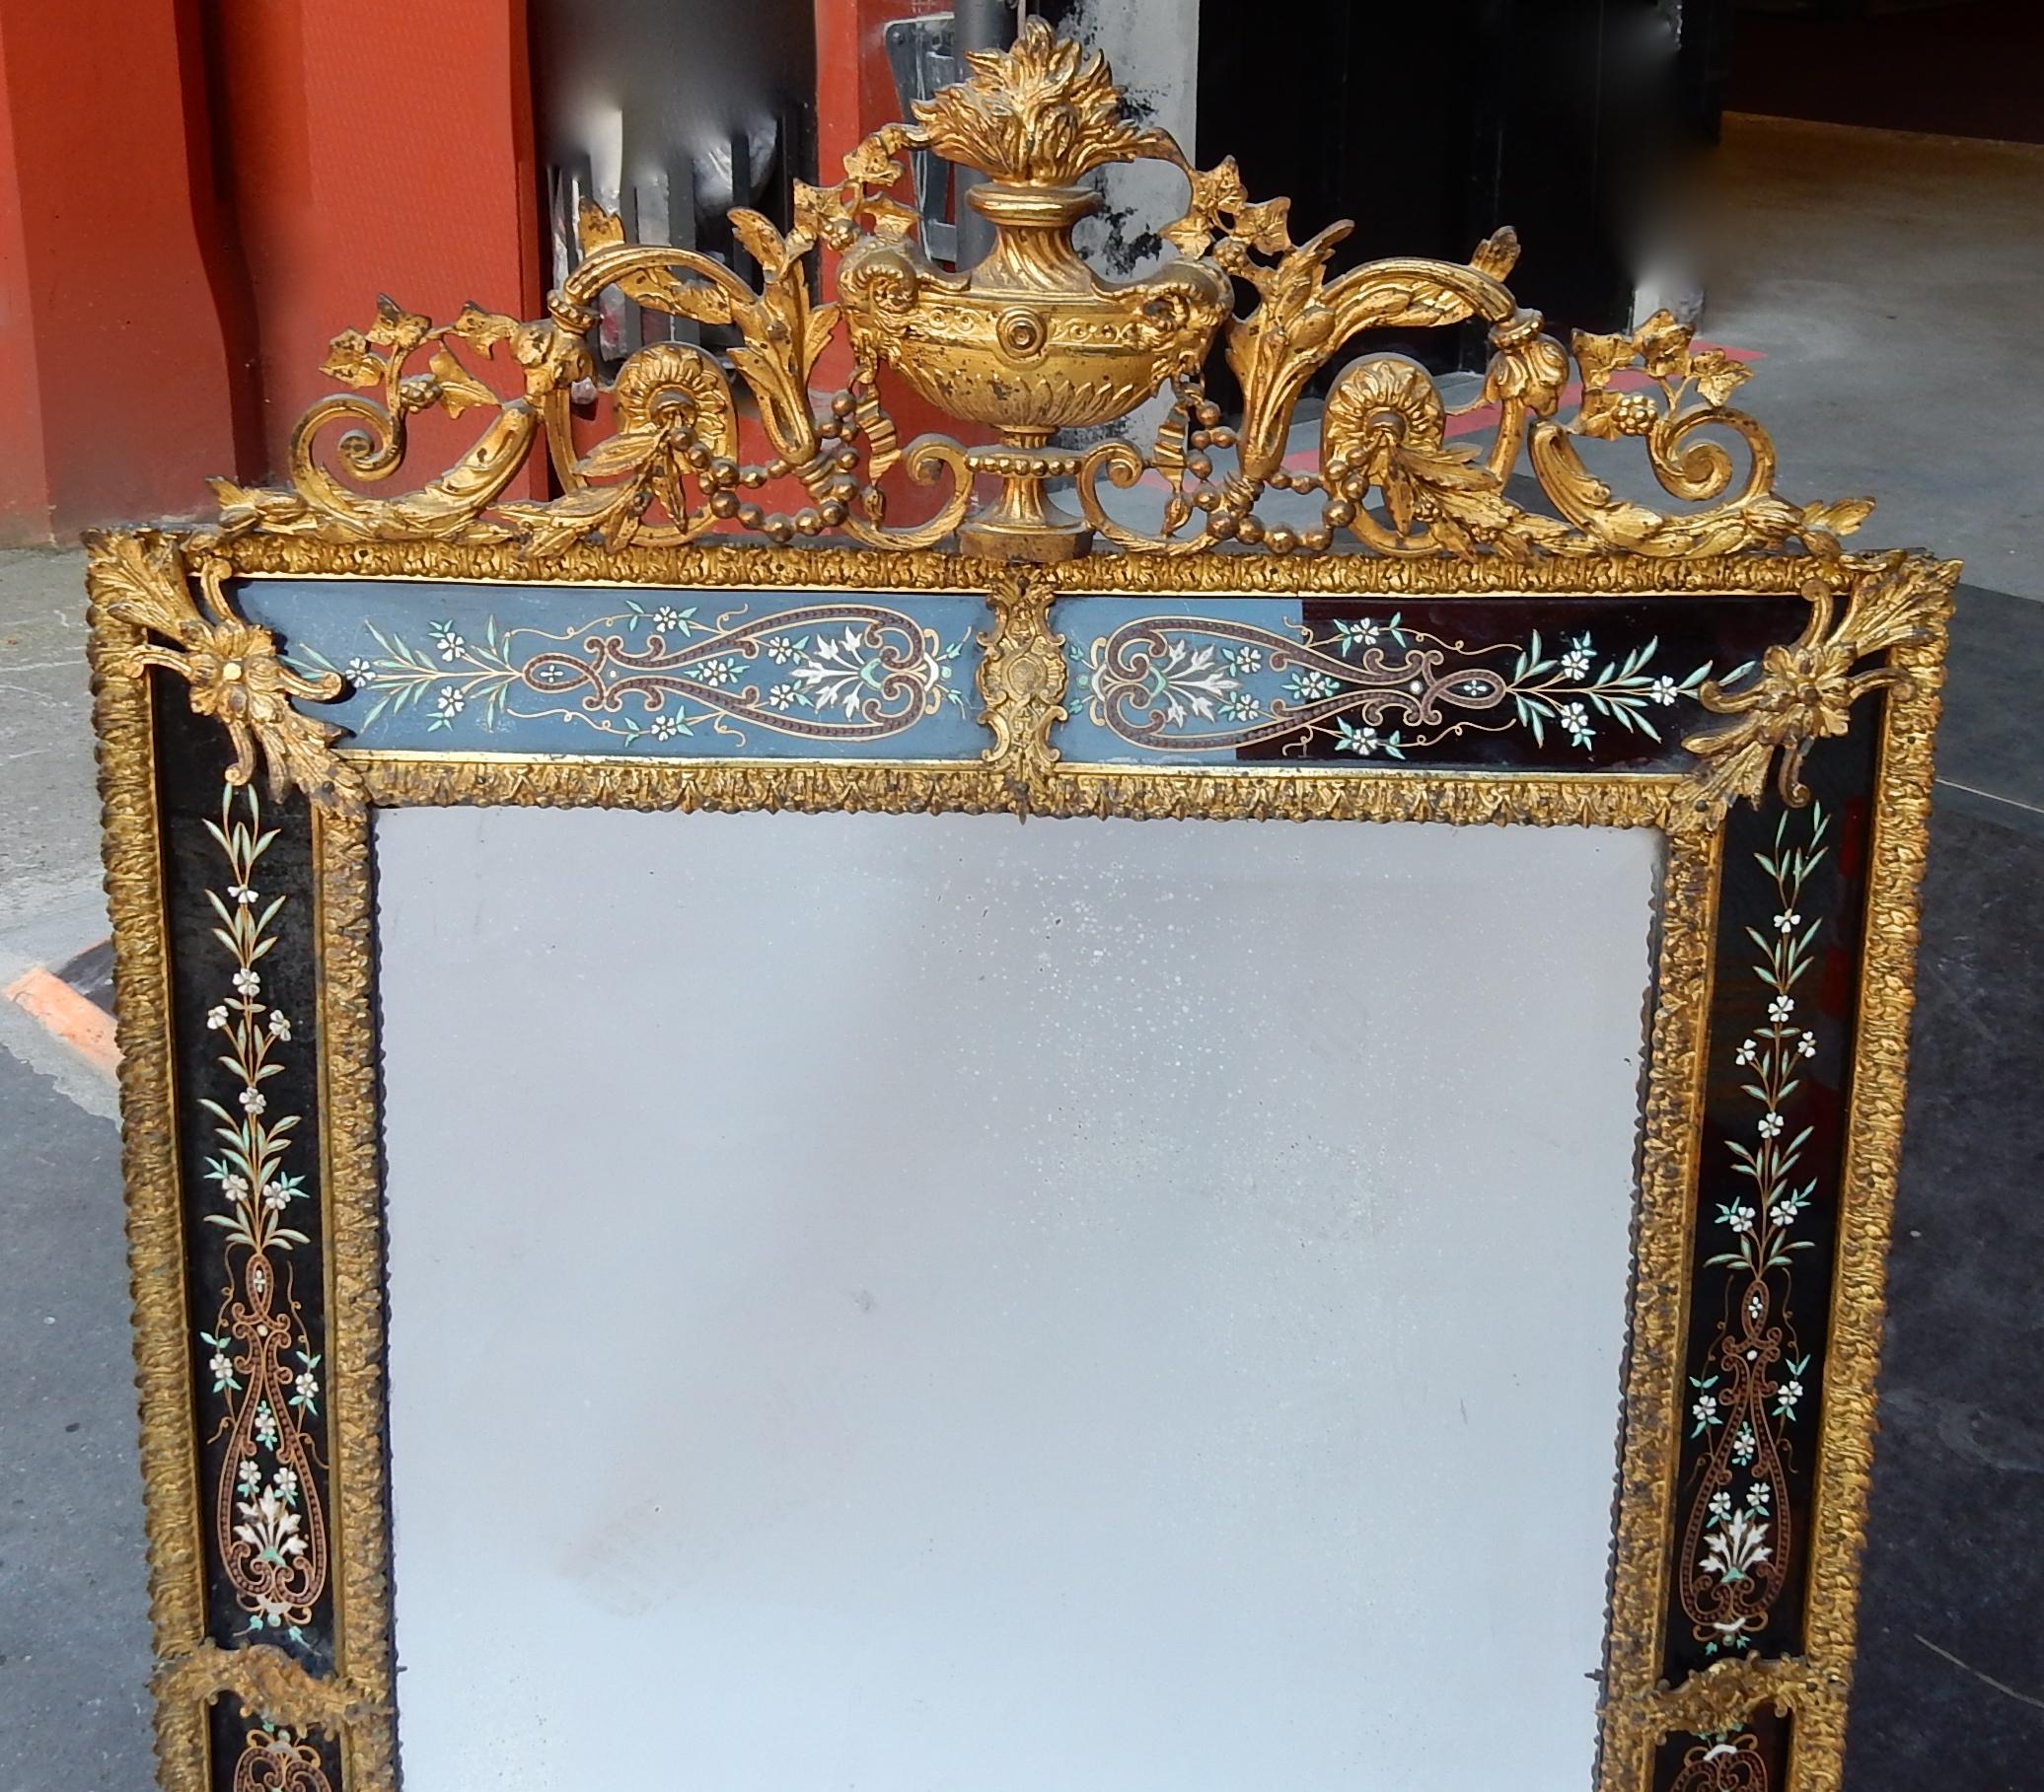 Venice rectangular, gilded bronze, mirror black color silvering emailed with flowers, the centre is beveled, some small spots, good condition, height without pediment 93 cm, circa 1880-1900.